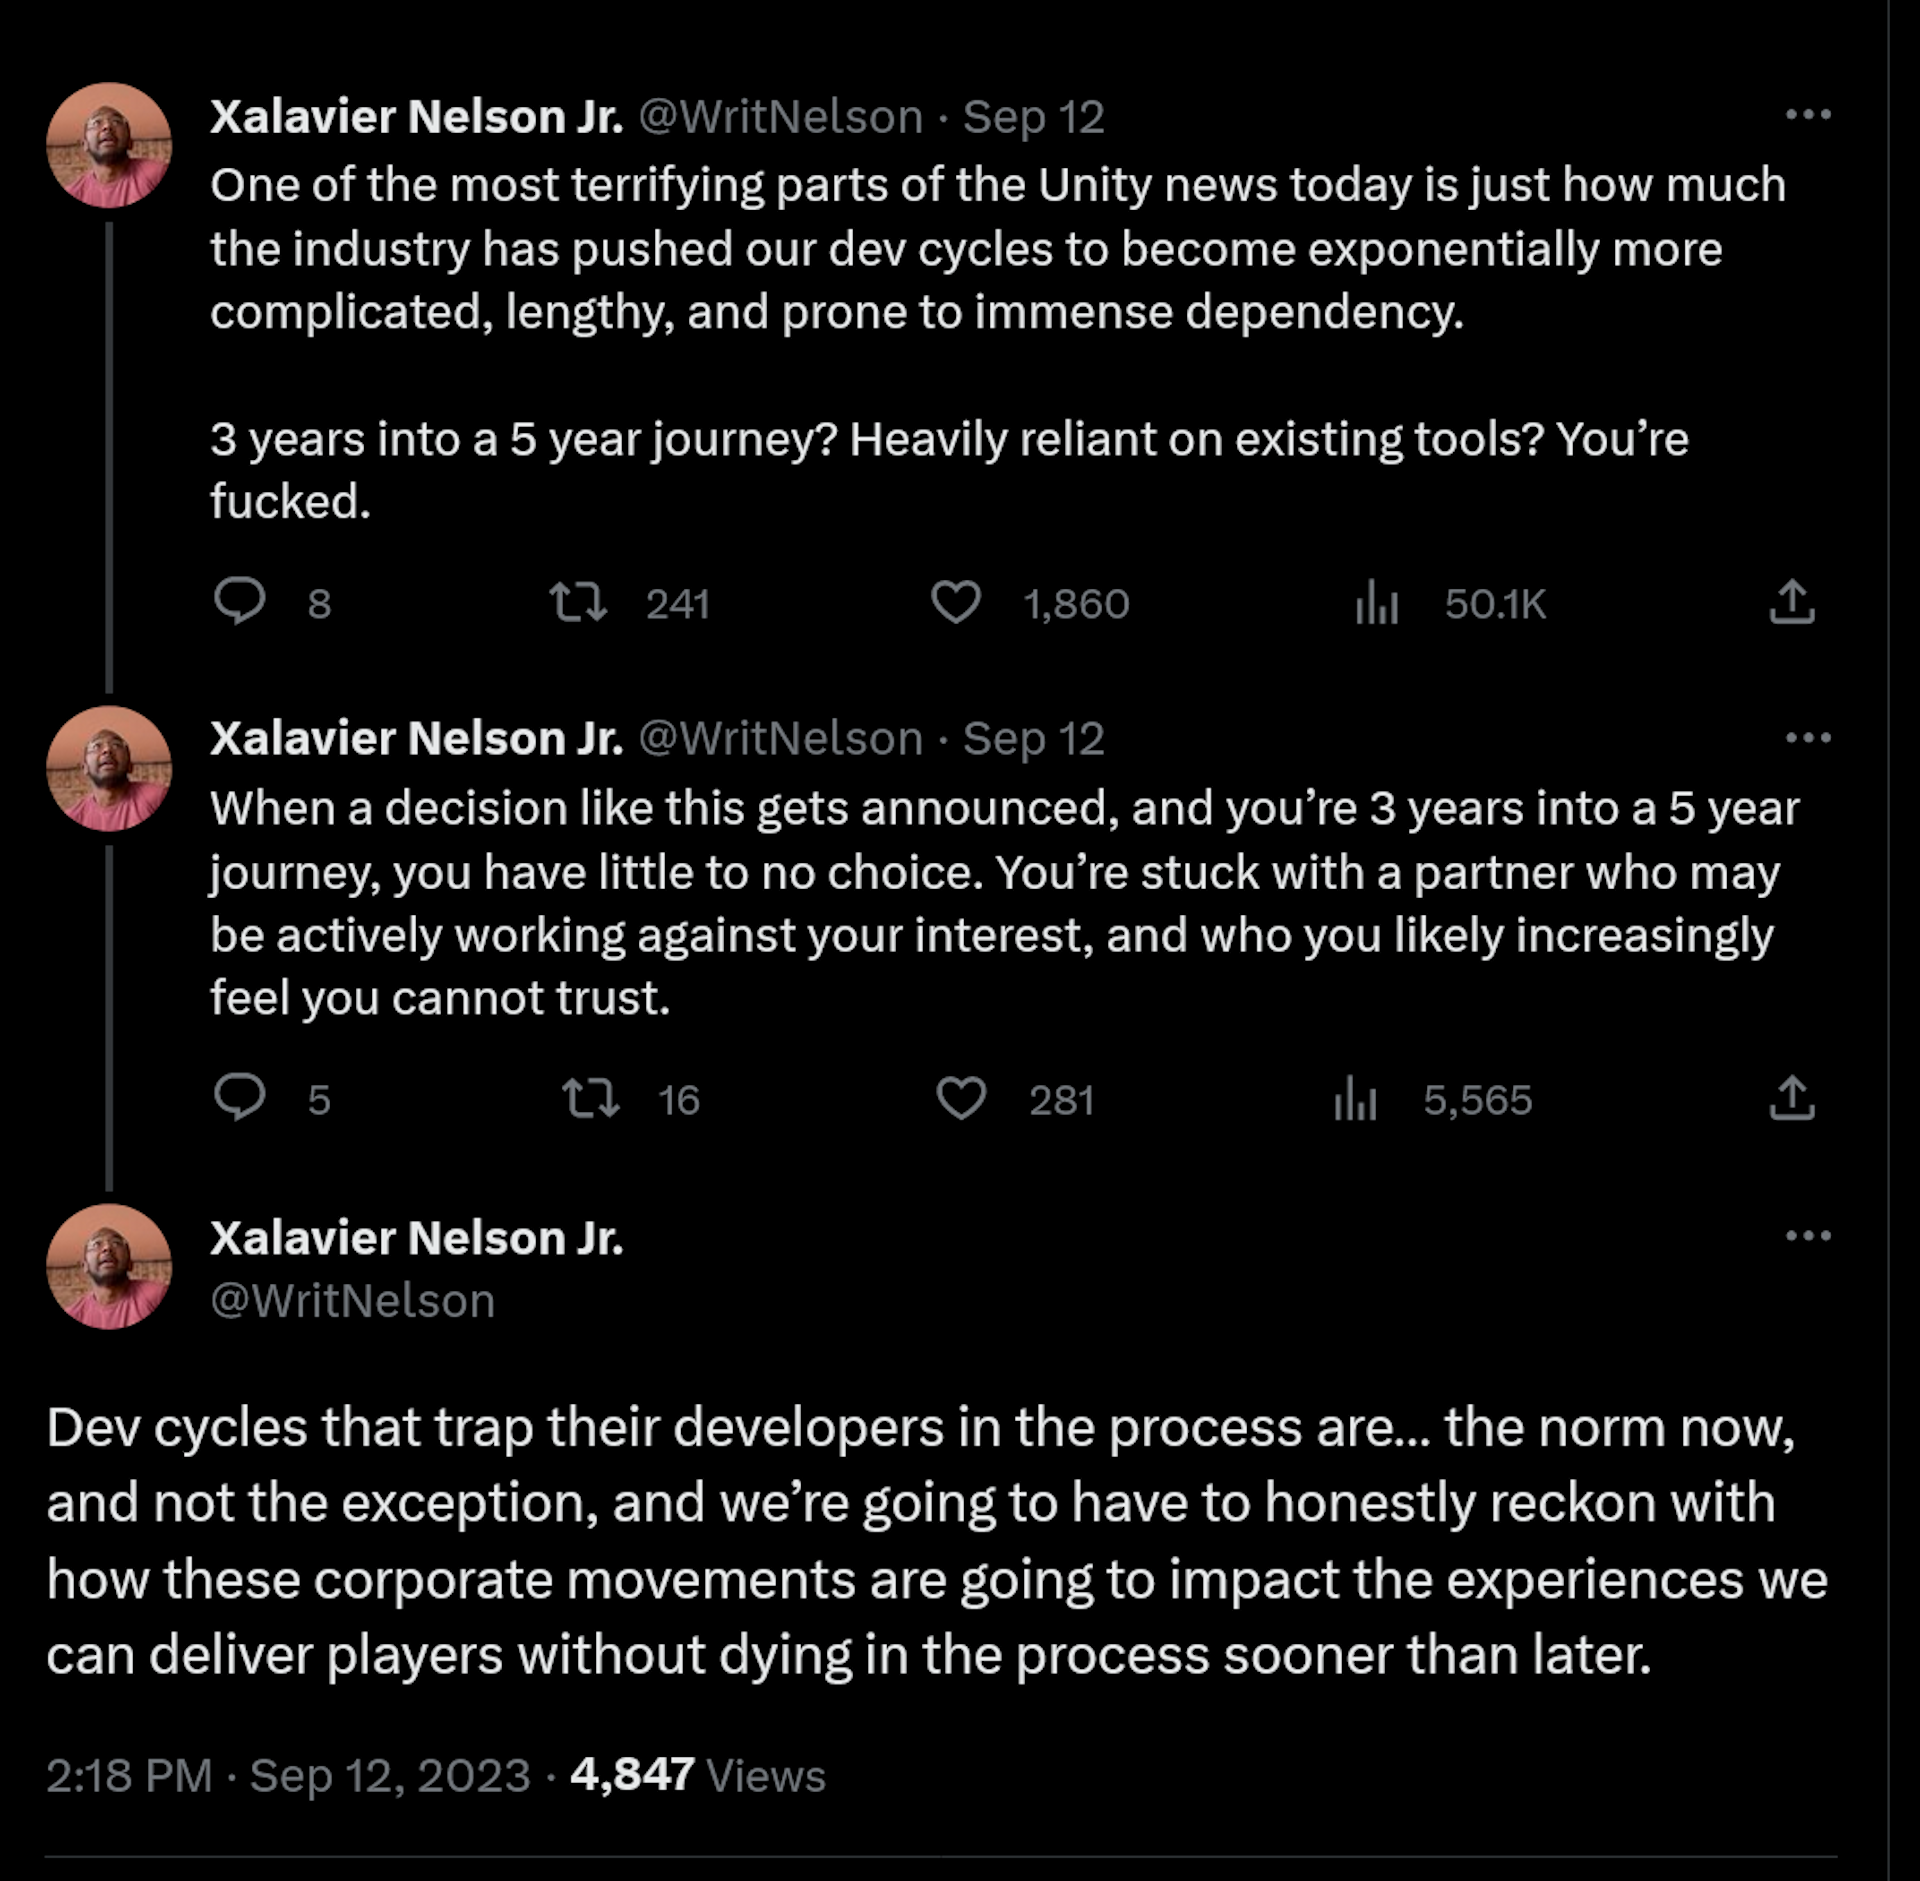 ne of the most terrifying parts of the Unity news today is just how much the industry has pushed our dev cycles to become exponentially more complicated, lengthy, and prone to immense dependency.  3 years into a 5 year journey? Heavily reliant on existing tools? You’re fucked. When a decision like this gets announced, and you’re 3 years into a 5 year journey, you have little to no choice. You’re stuck with a partner who may be actively working against your interest, and who you likely increasingly feel you cannot trust. Dev cycles that trap their developers in the process are… the norm now, and not the exception, and we’re going to have to honestly reckon with how these corporate movements are going to impact the experiences we can deliver players without dying in the process sooner than later.